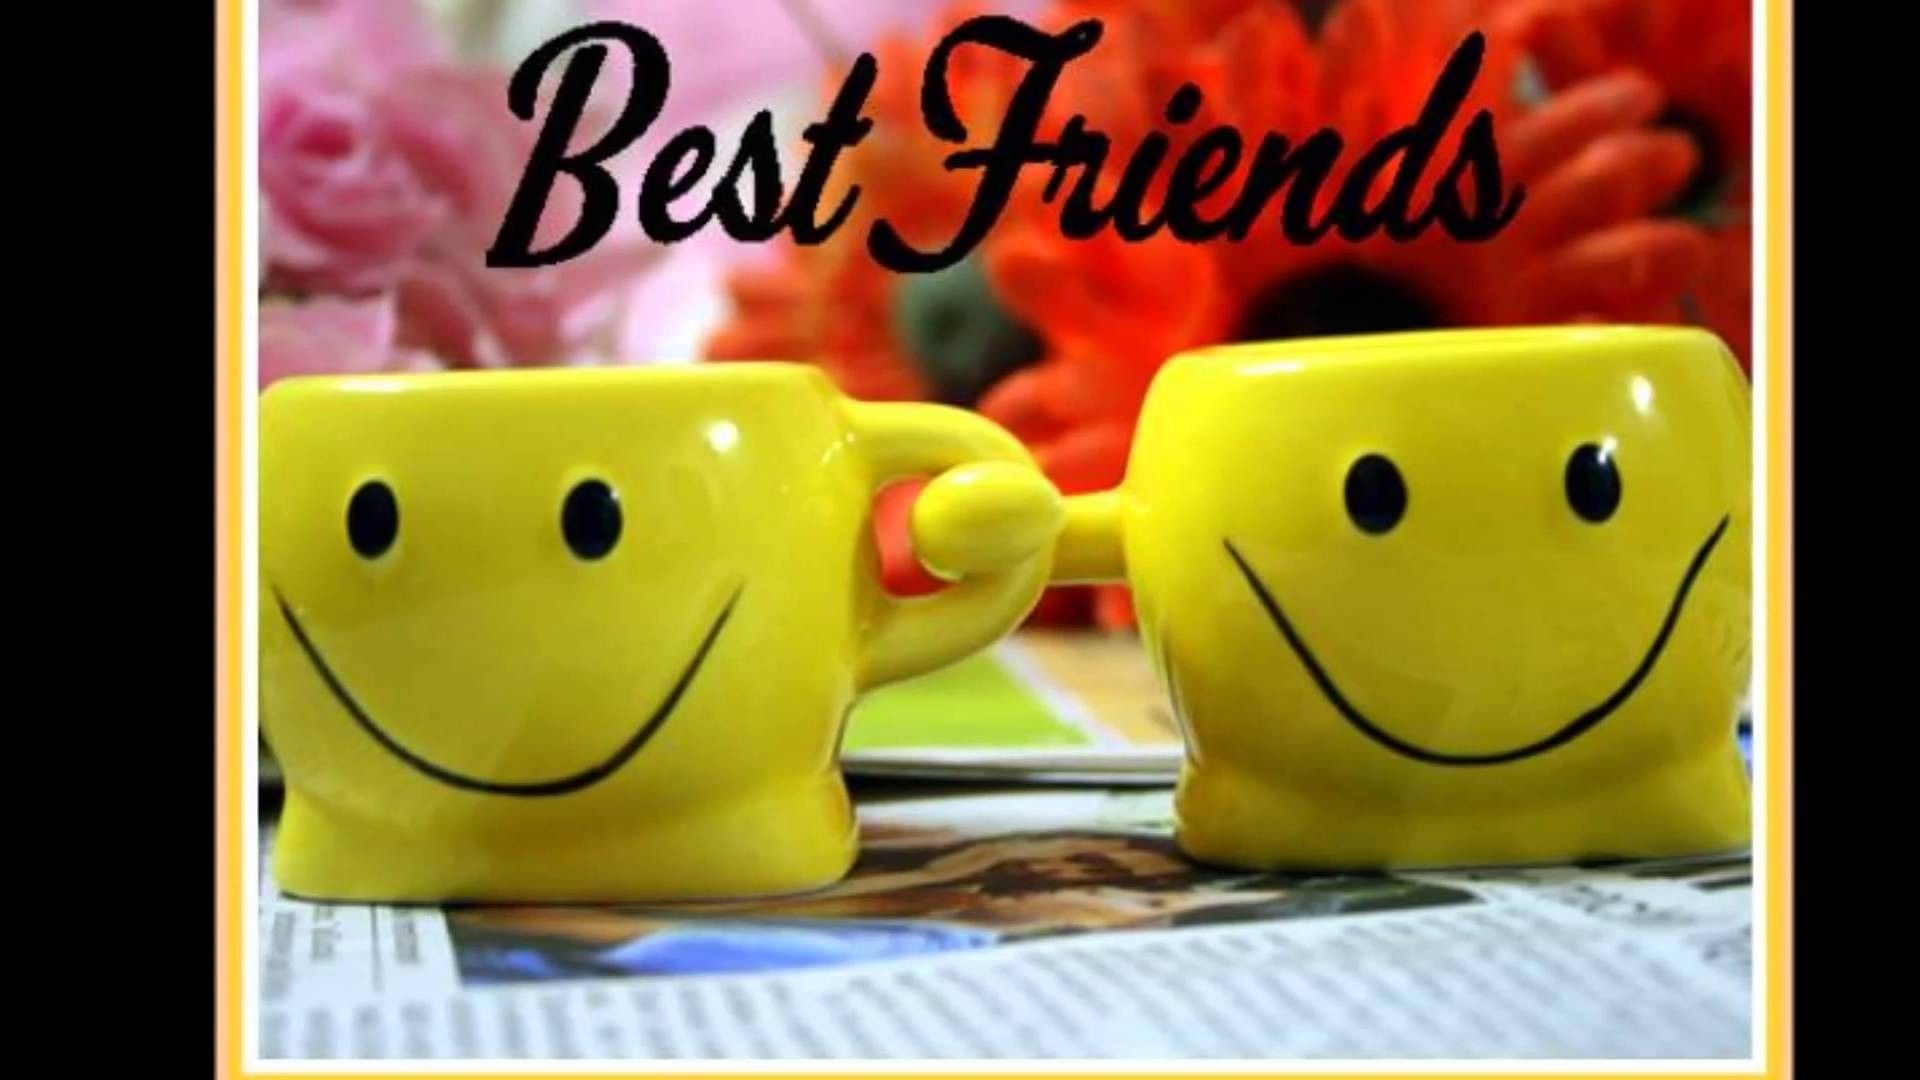 1920x1080 Cute Friendship Wallpapers with Messages Hindi - Wallpaper Rocket